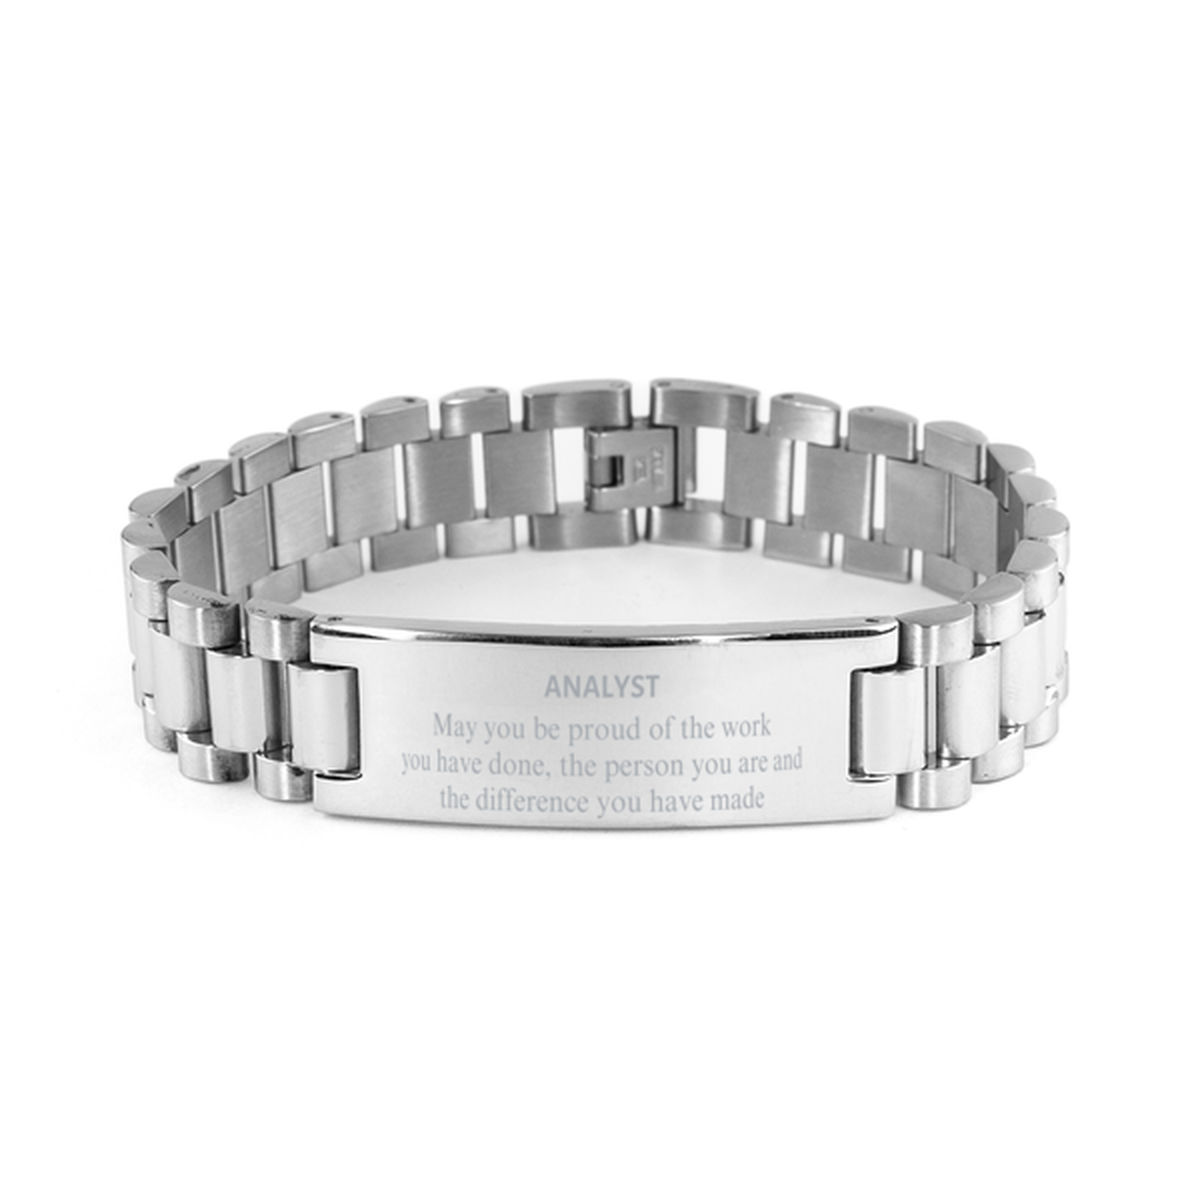 Analyst May you be proud of the work you have done, Retirement Analyst Ladder Stainless Steel Bracelet for Colleague Appreciation Gifts Amazing for Analyst